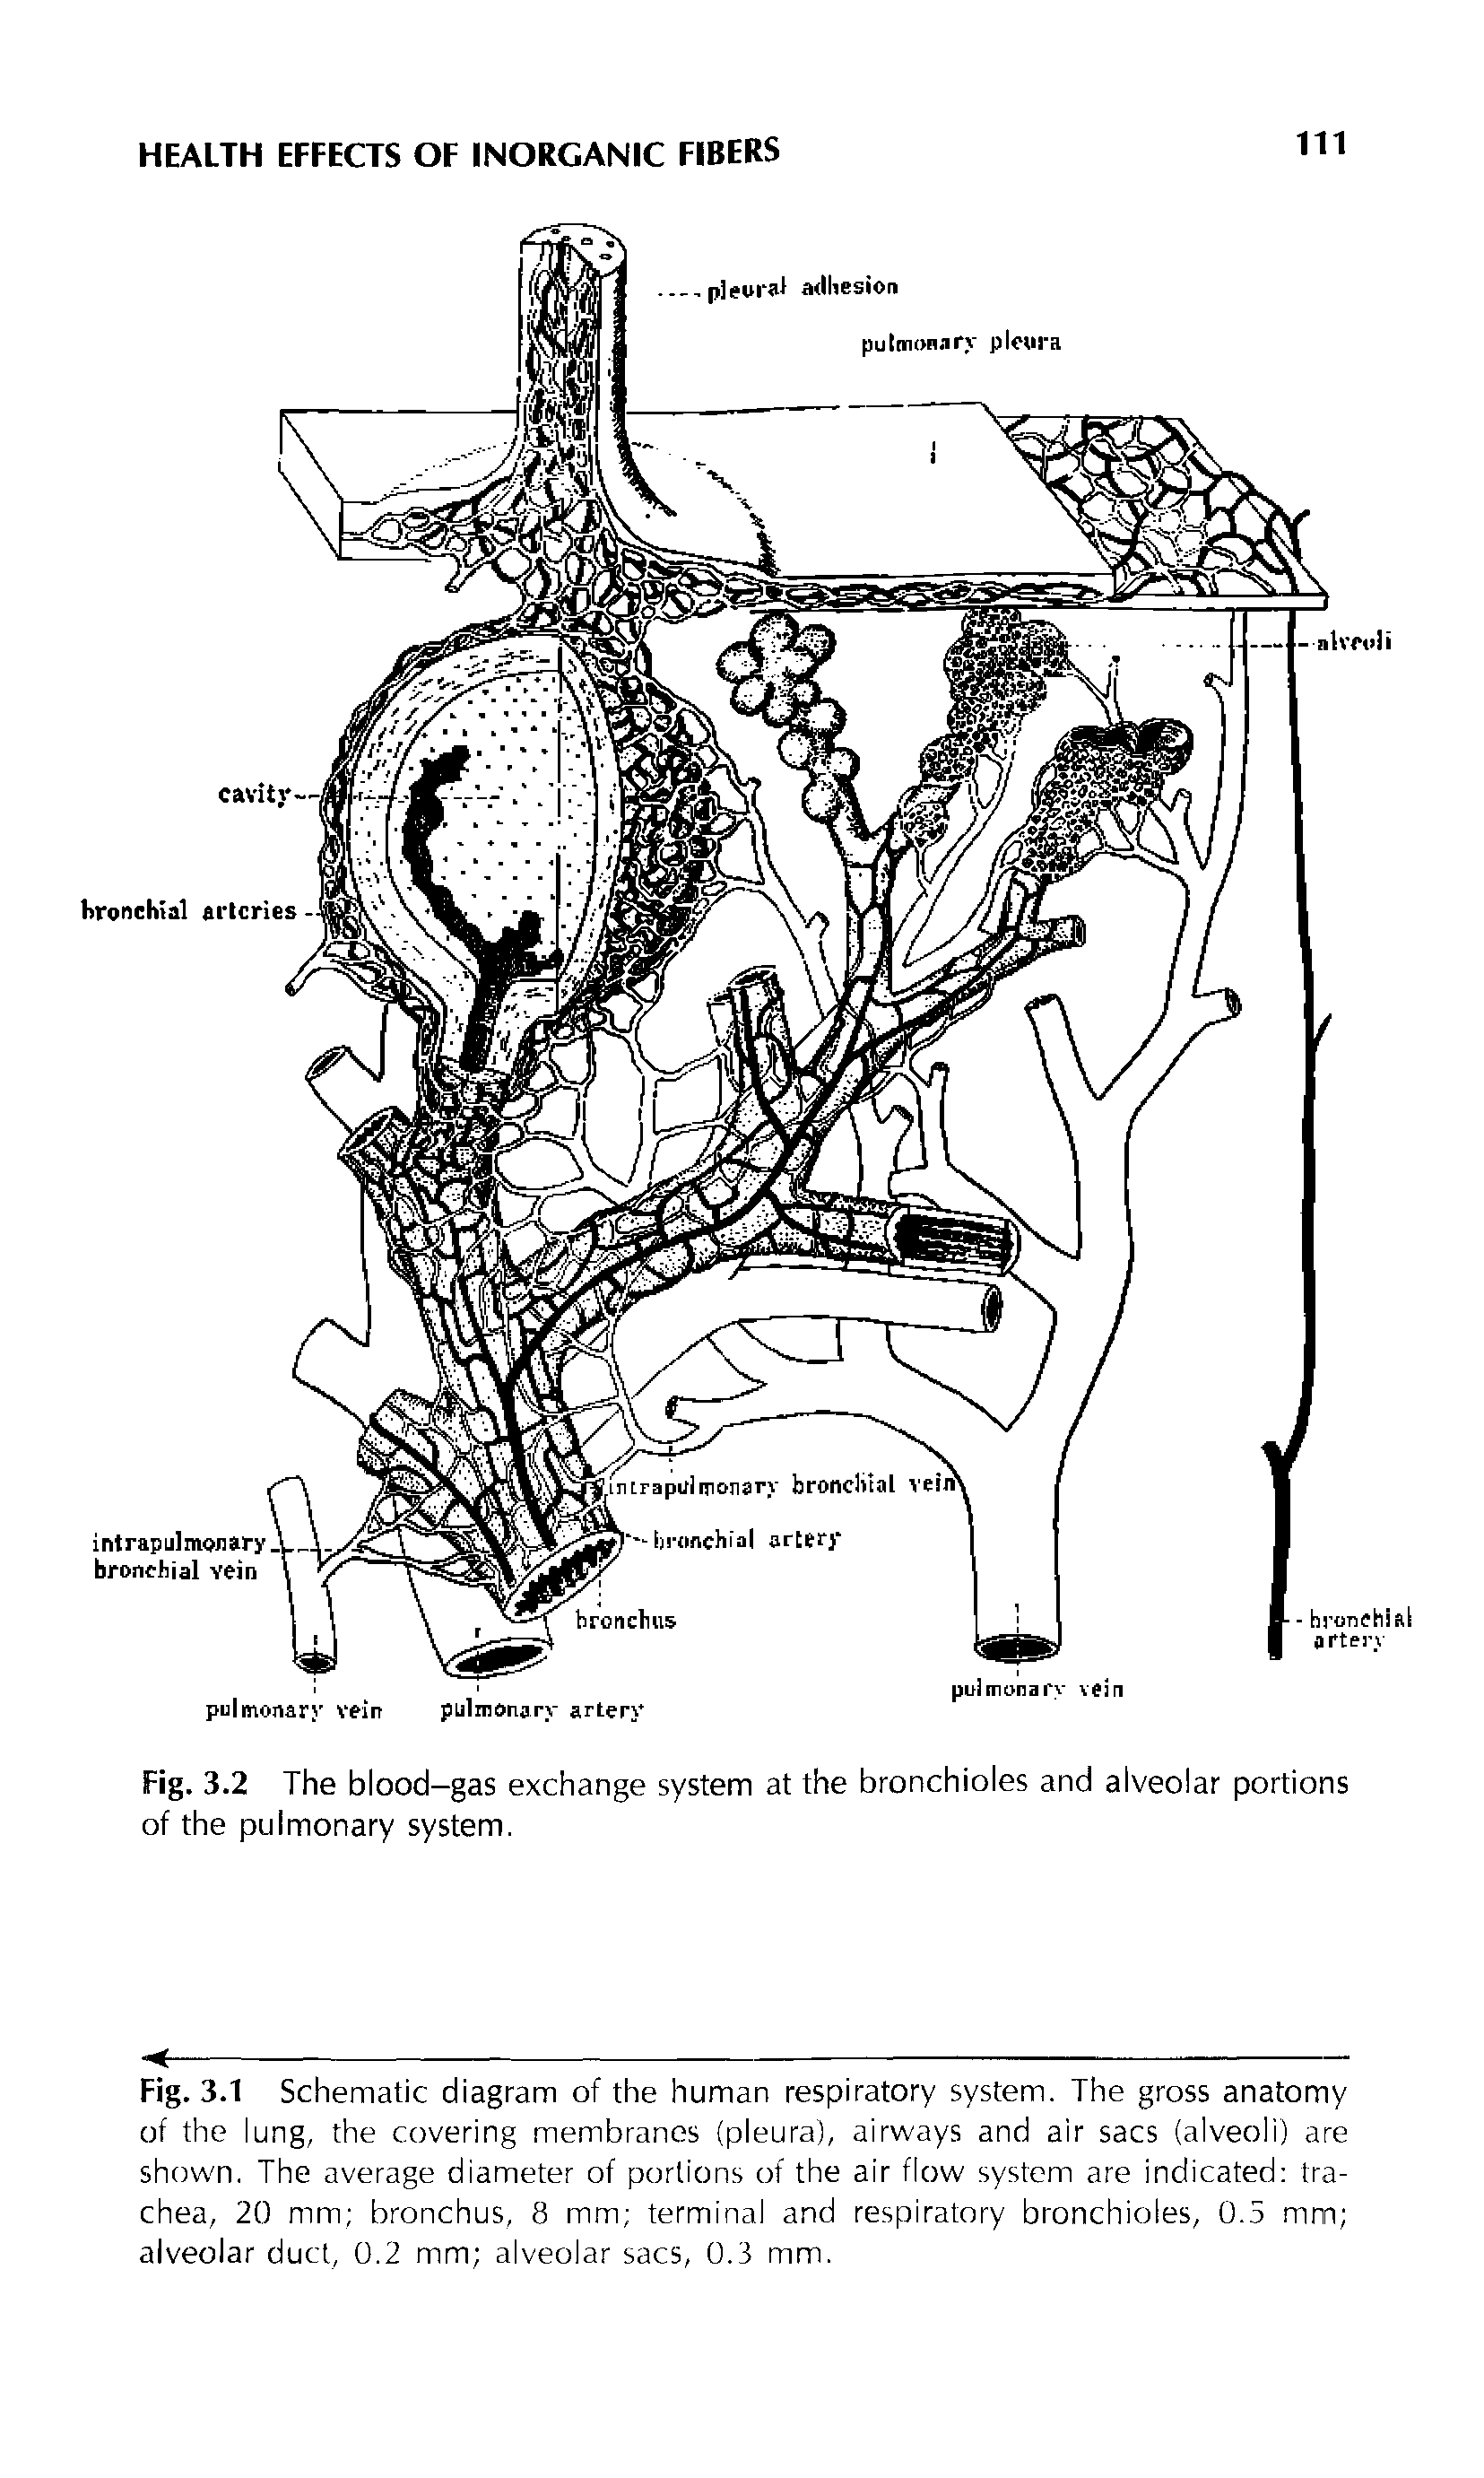 Fig. 3.1 Schematic diagram of the human respiratory system. The gross anatomy of the lung, the covering membranes (pleura), airways and air sacs (alveoli) are shown. The average diameter of portions of the air flow system are indicated trachea, 20 mm bronchus, 8 mm terminal and respiratory bronchioles, 0.5 mnn alveolar duct, 0.2 mm alveolar sacs, 0.3 mm.